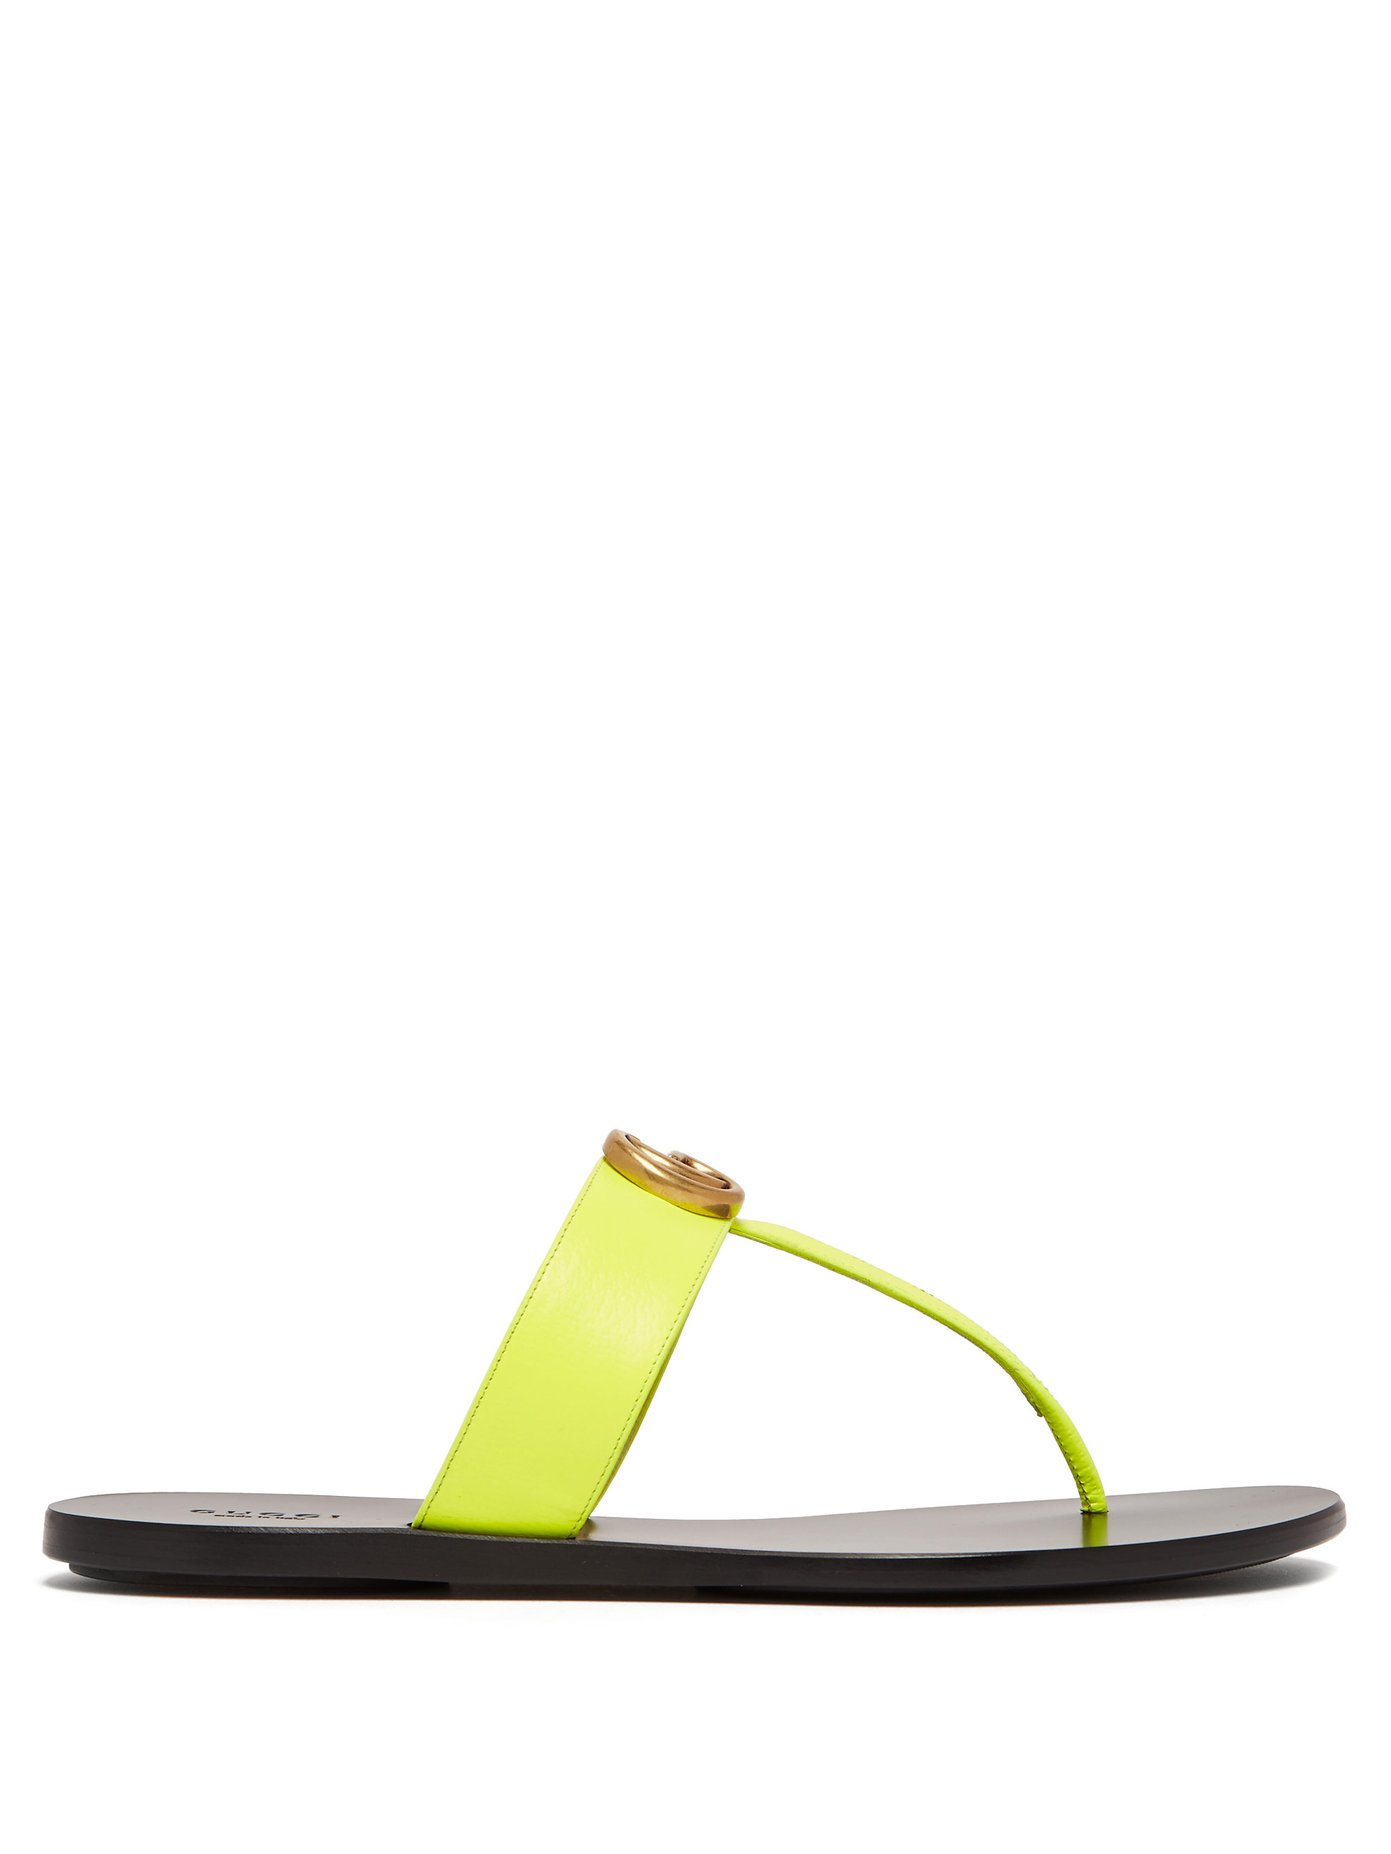 GG Marmont flat leather sandals | Gucci 